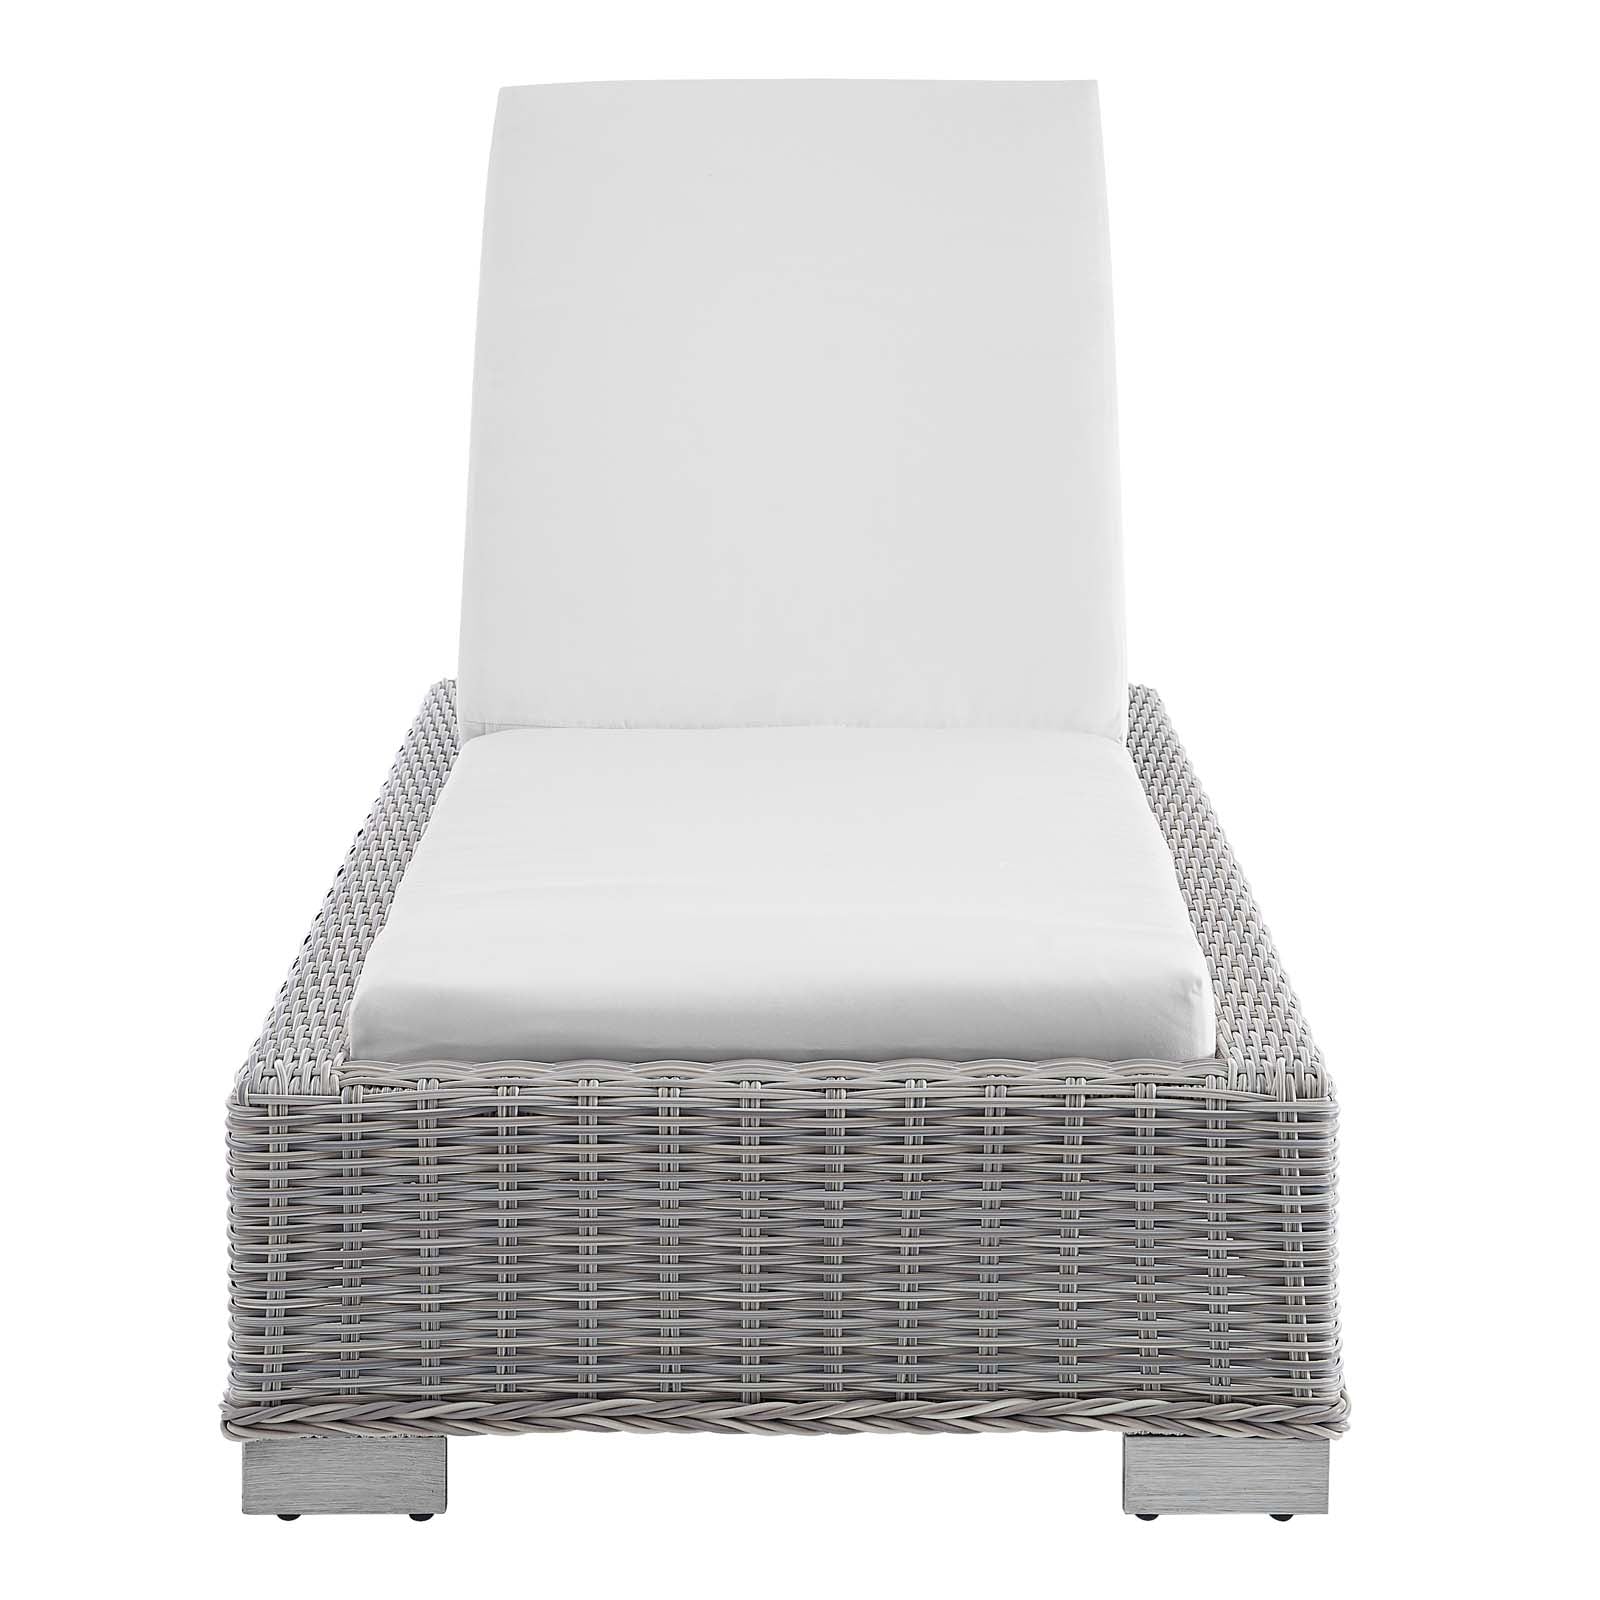 Modway Outdoor Loungers - Conway Sunbrella Outdoor Patio Wicker Rattan Chaise Lounge Light Gray White